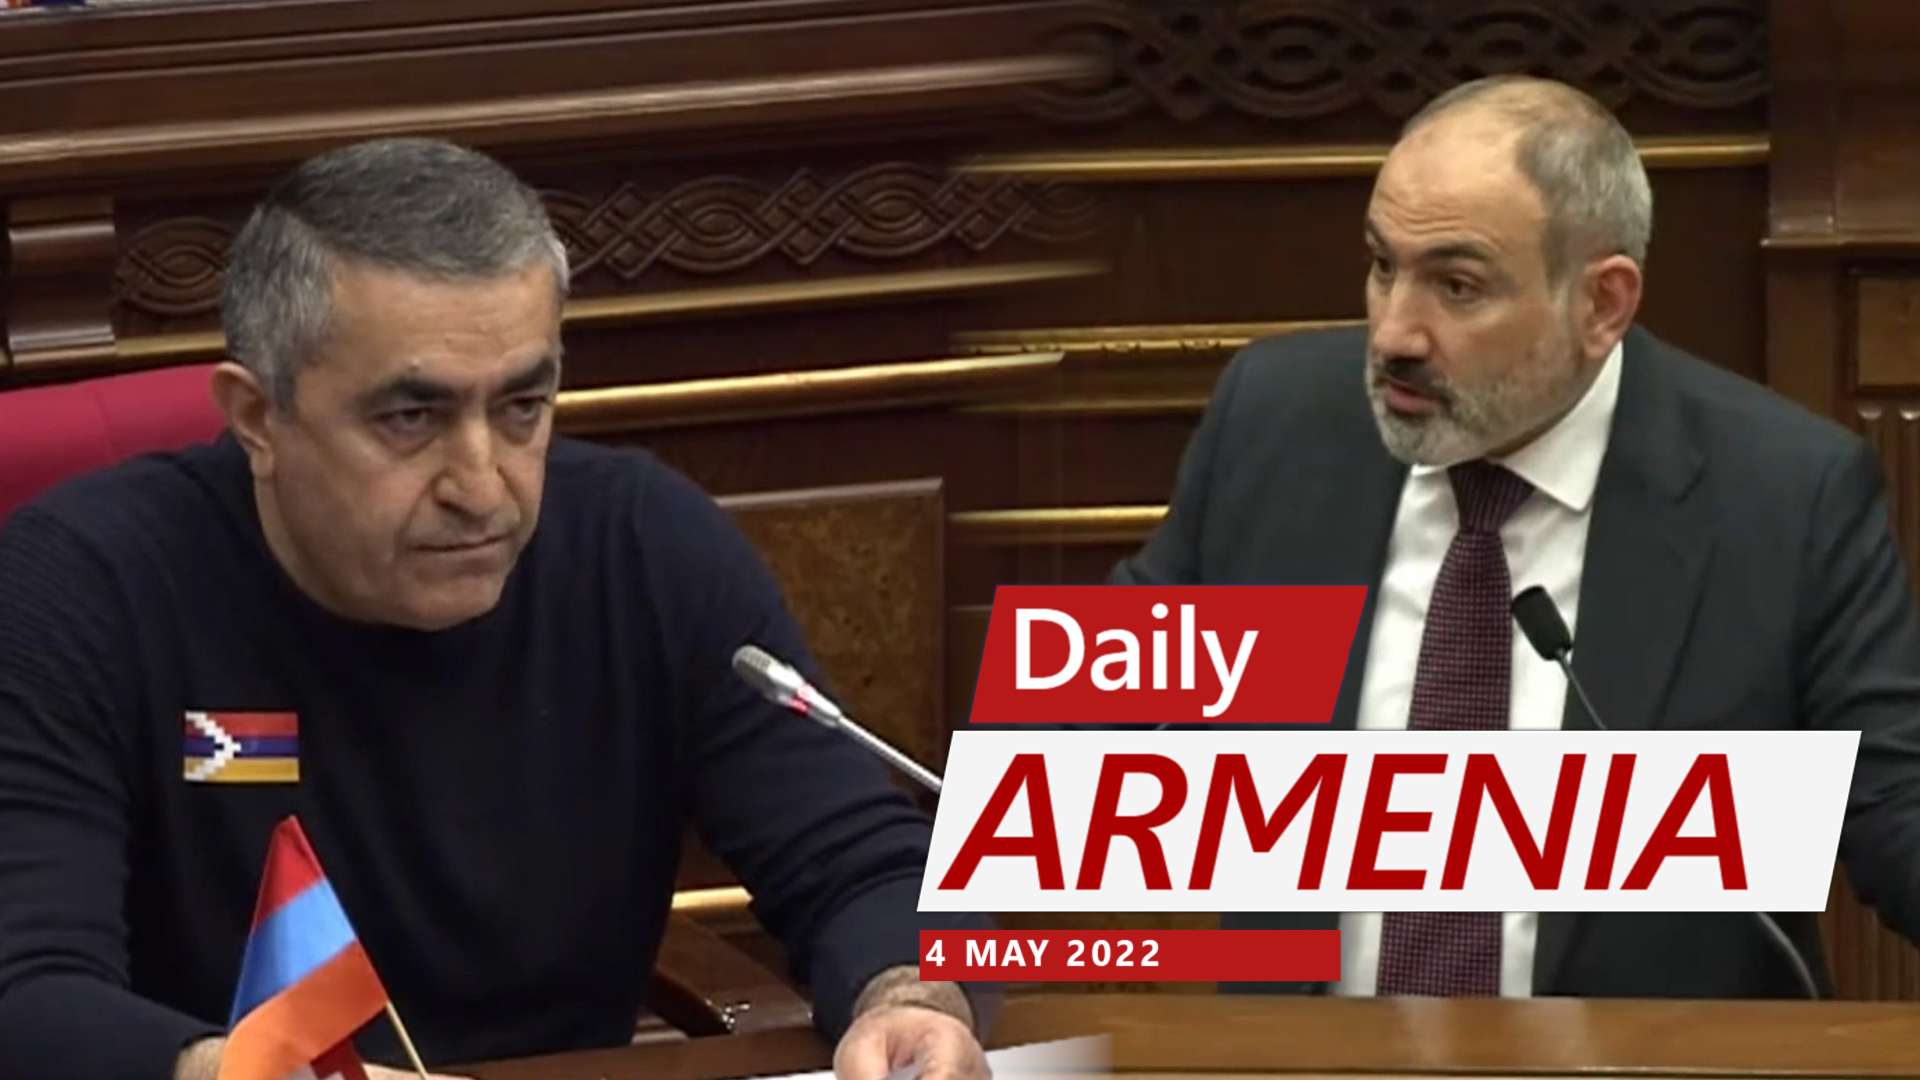 Opposition deputies walk-out of Armenia’s parliament during Pashinyan’s Q&A session